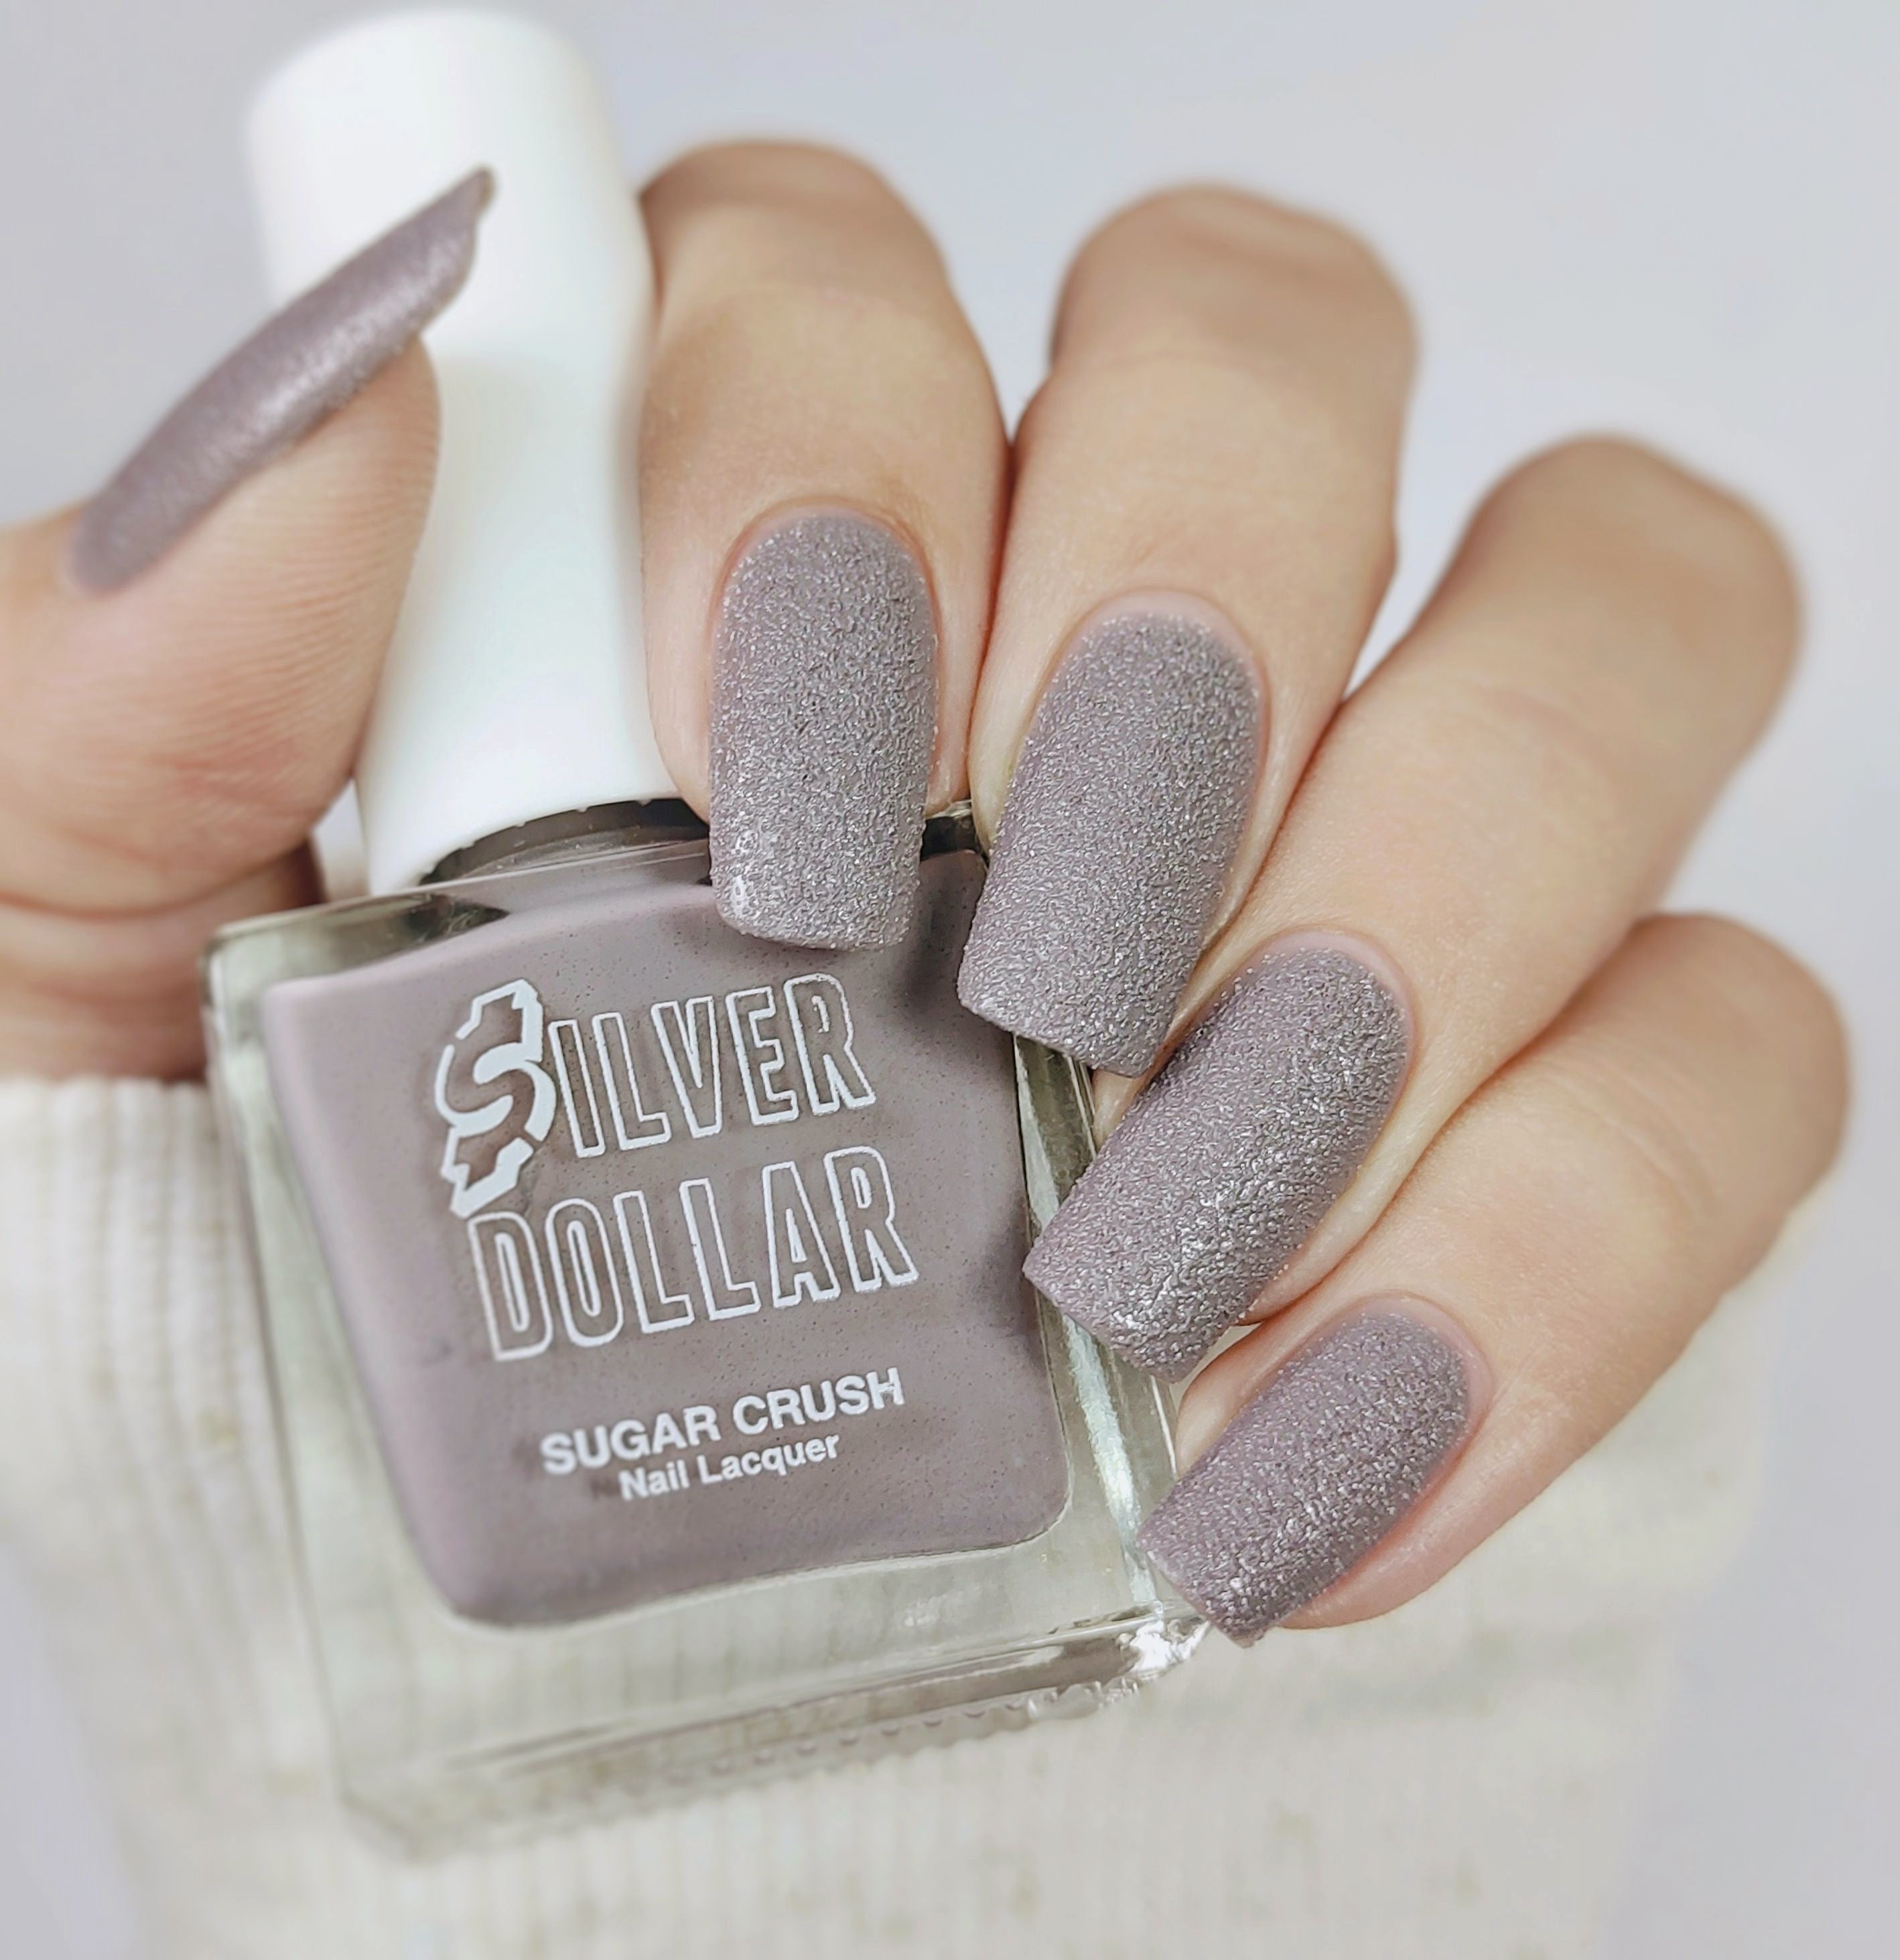 SUGAR Cosmetics - Watching perfect nails is therapeutic!... | Facebook